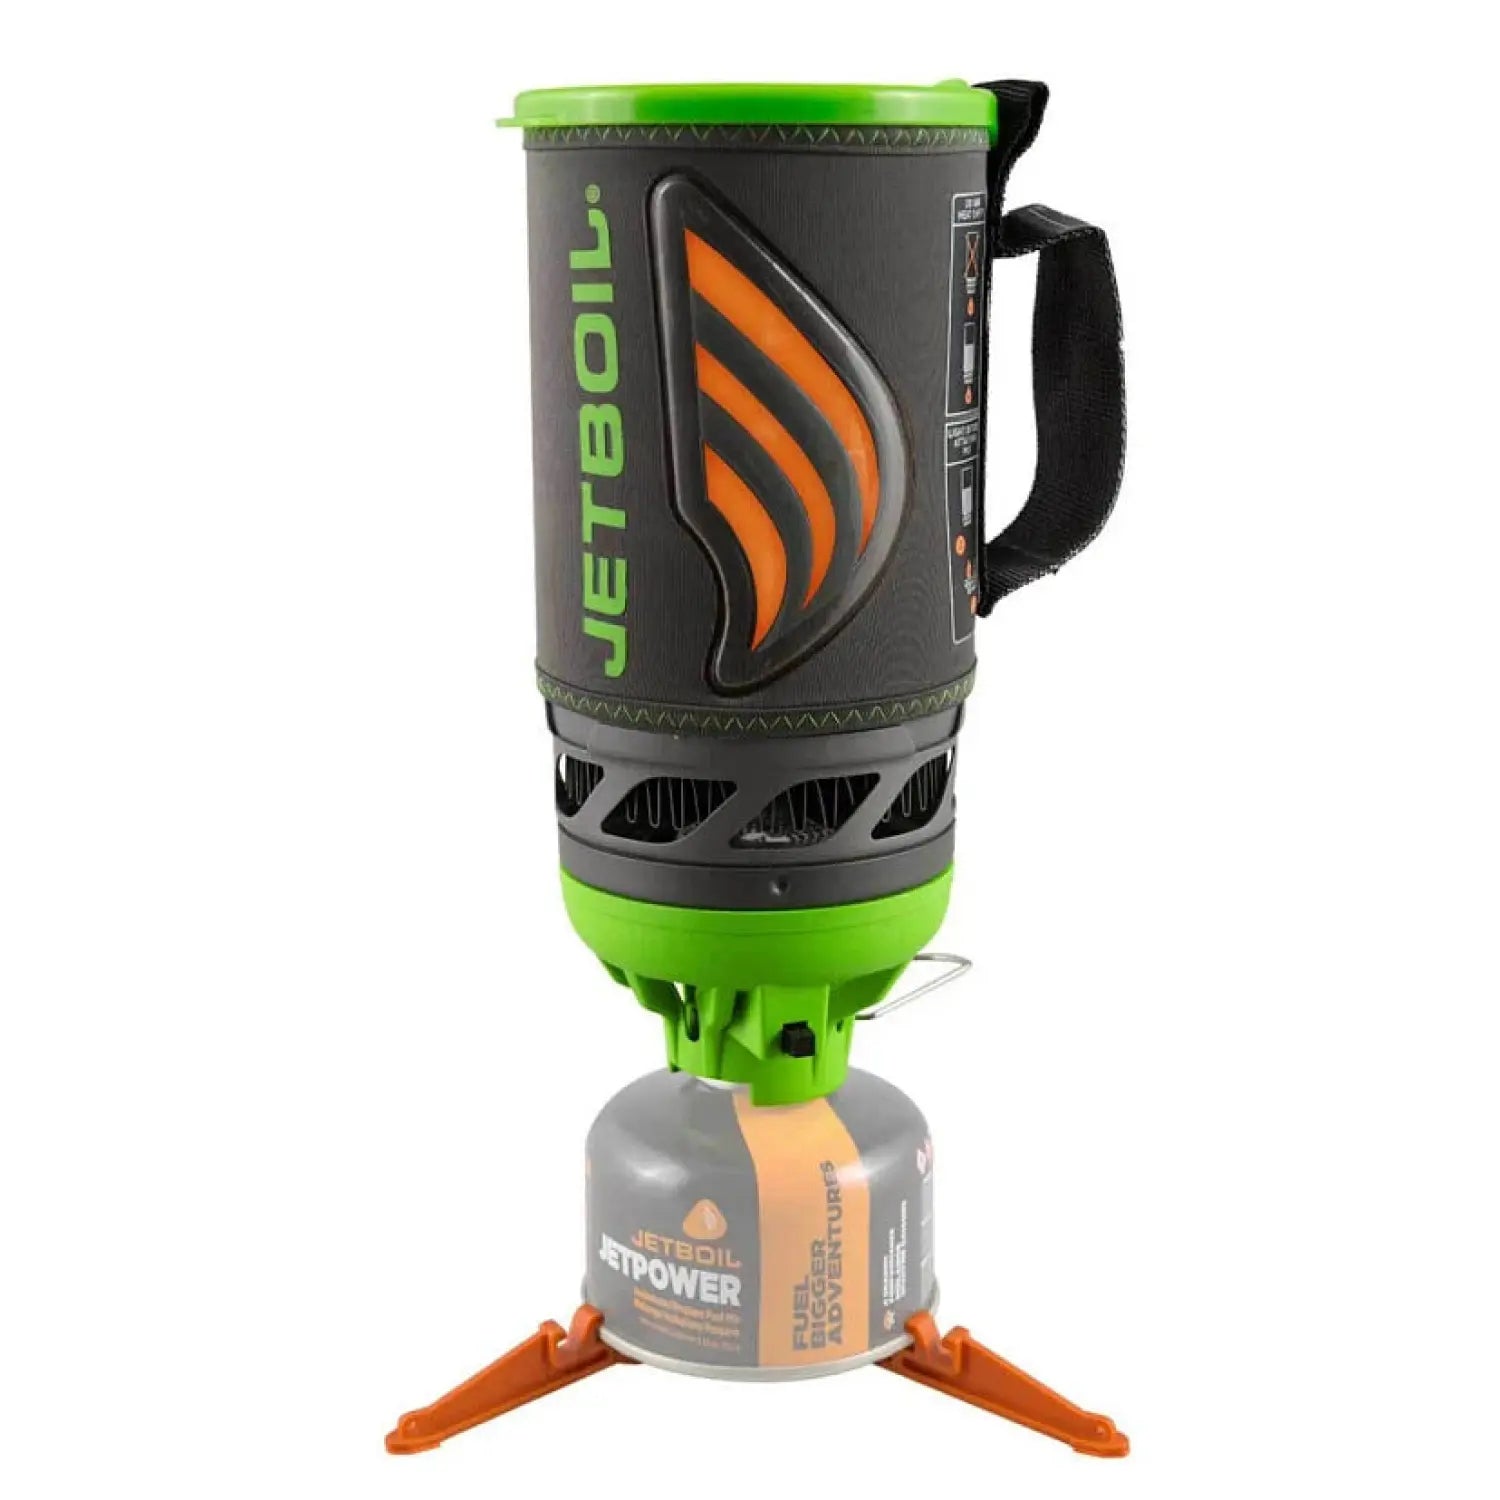 Jetboil Flash Java Kit shown with all compnents (Fuel Cannister not included)